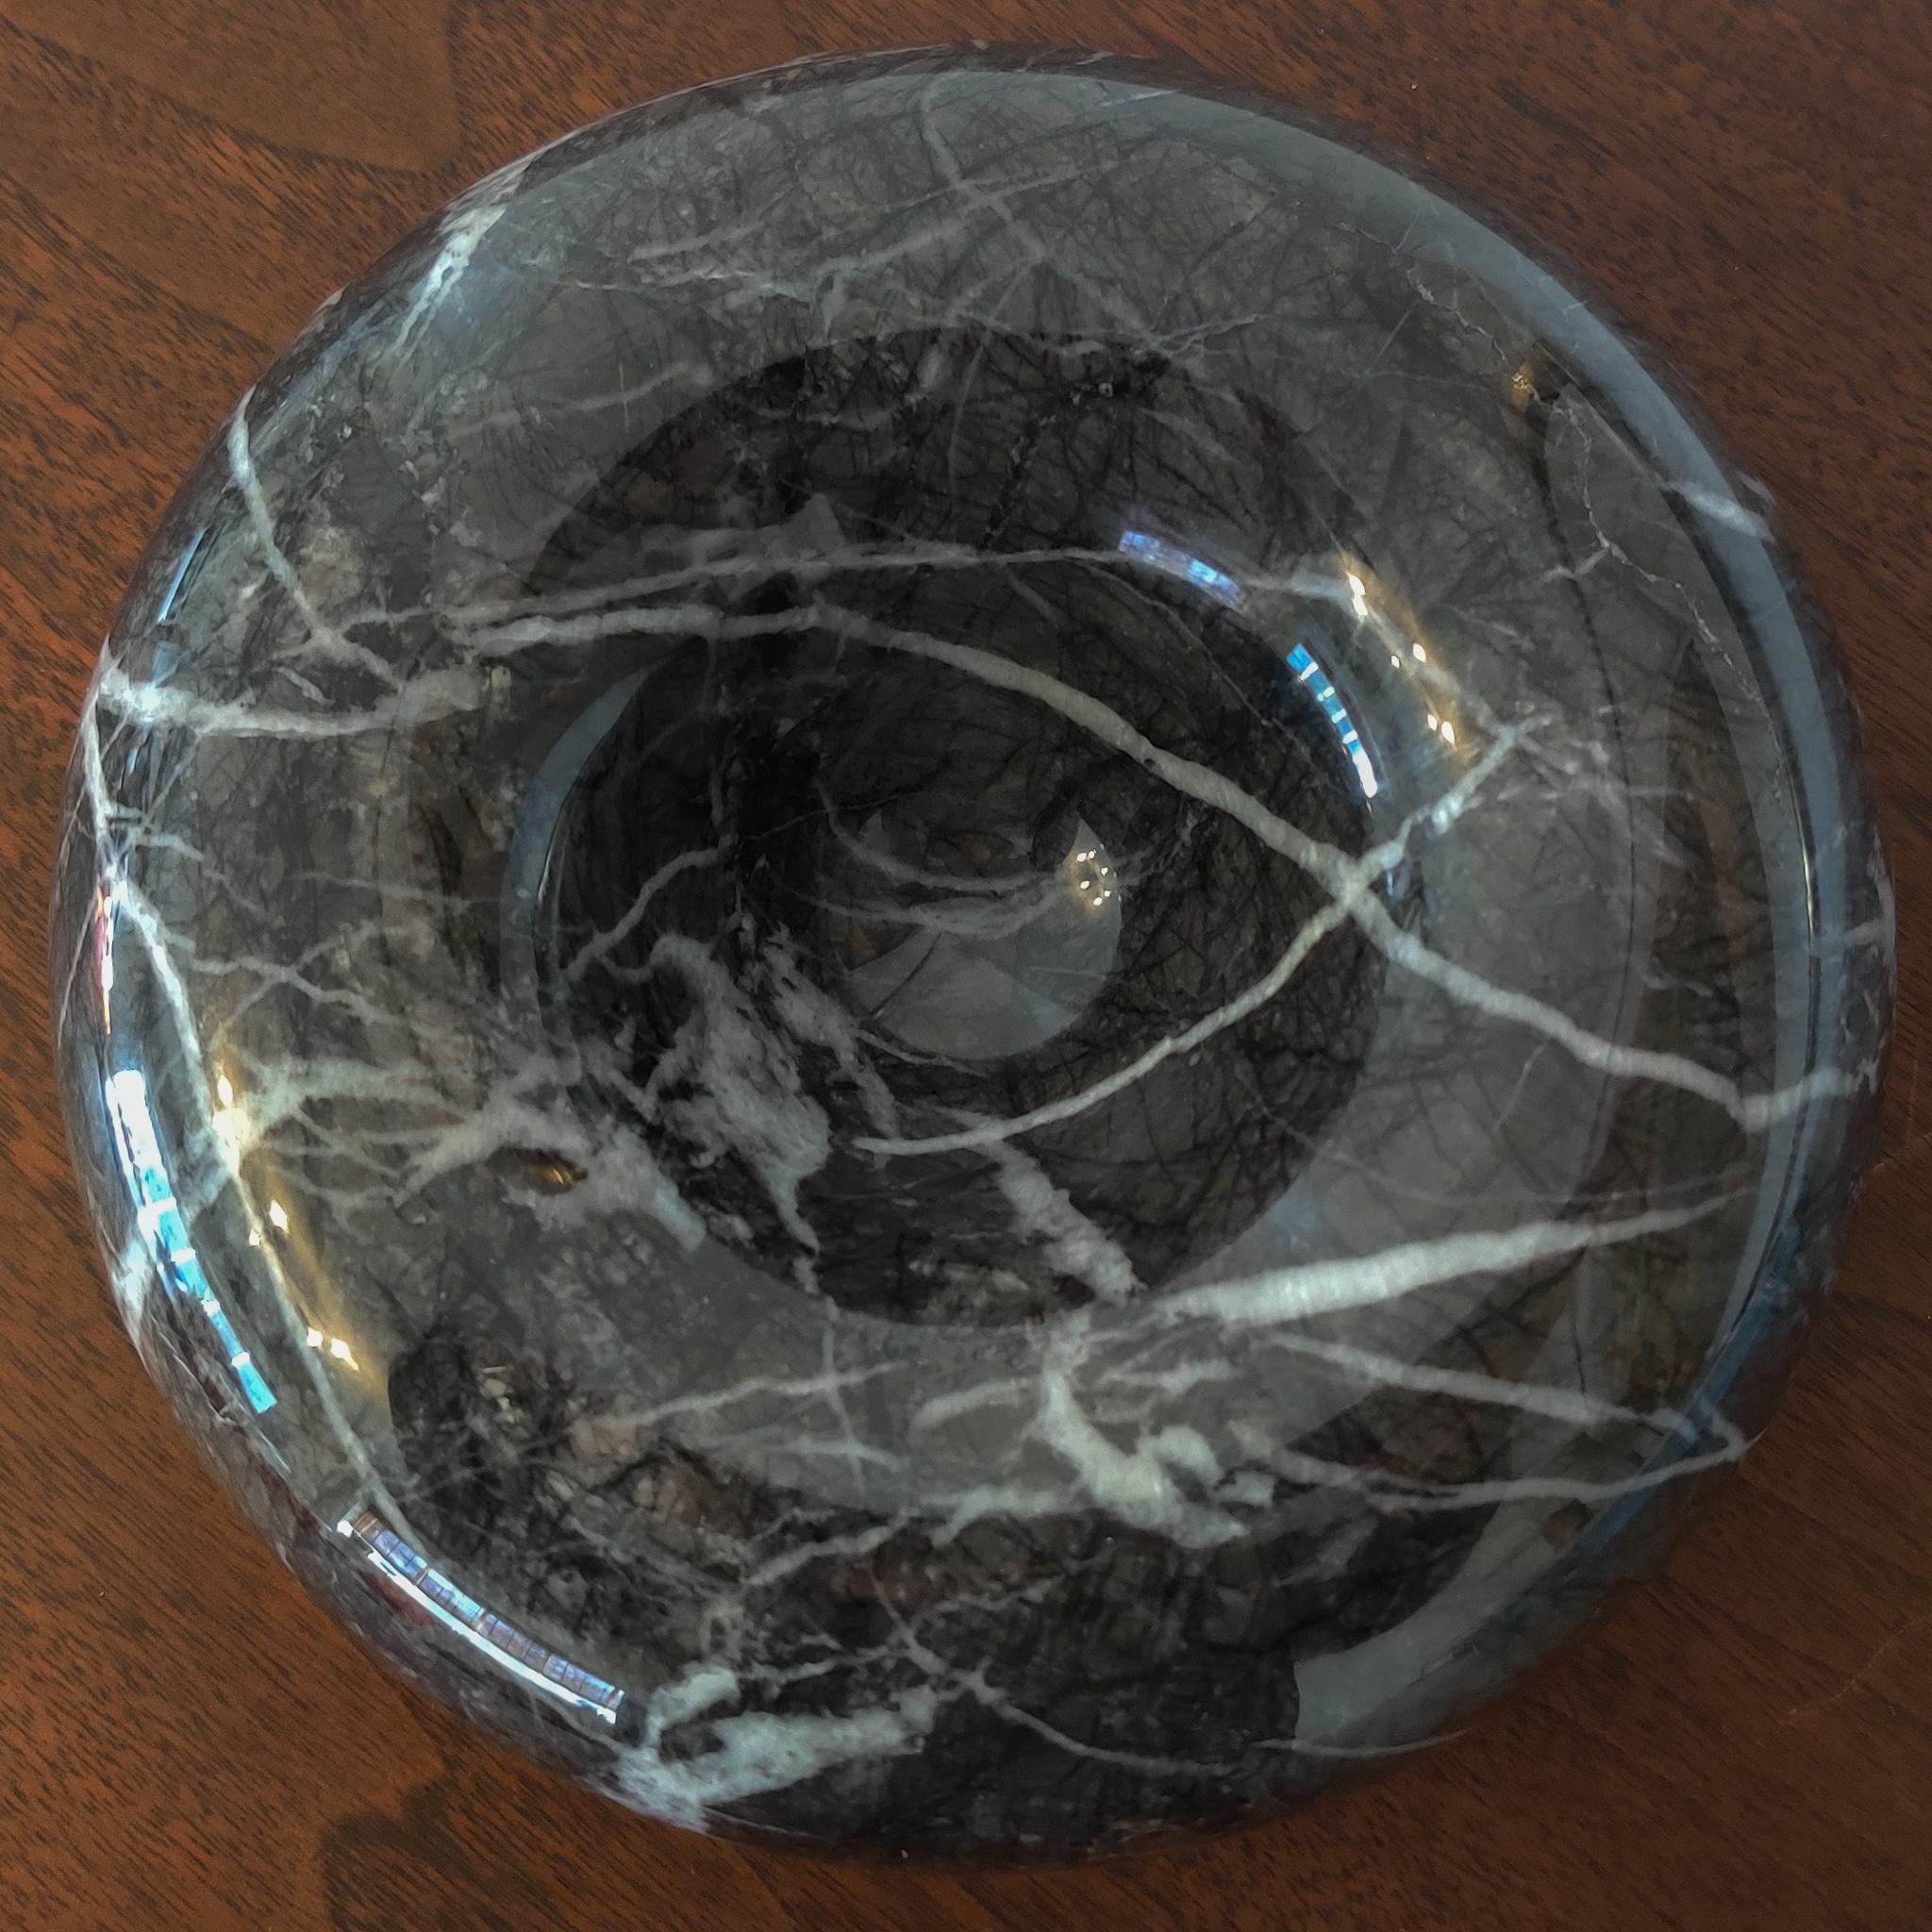 This black and white veined marble bowl was made by Atelier International for Up & Up and designer Sergio Asti. It is heavy and solid and makes for a great spot to store common houshold or office items or even another decorative object.

Condition